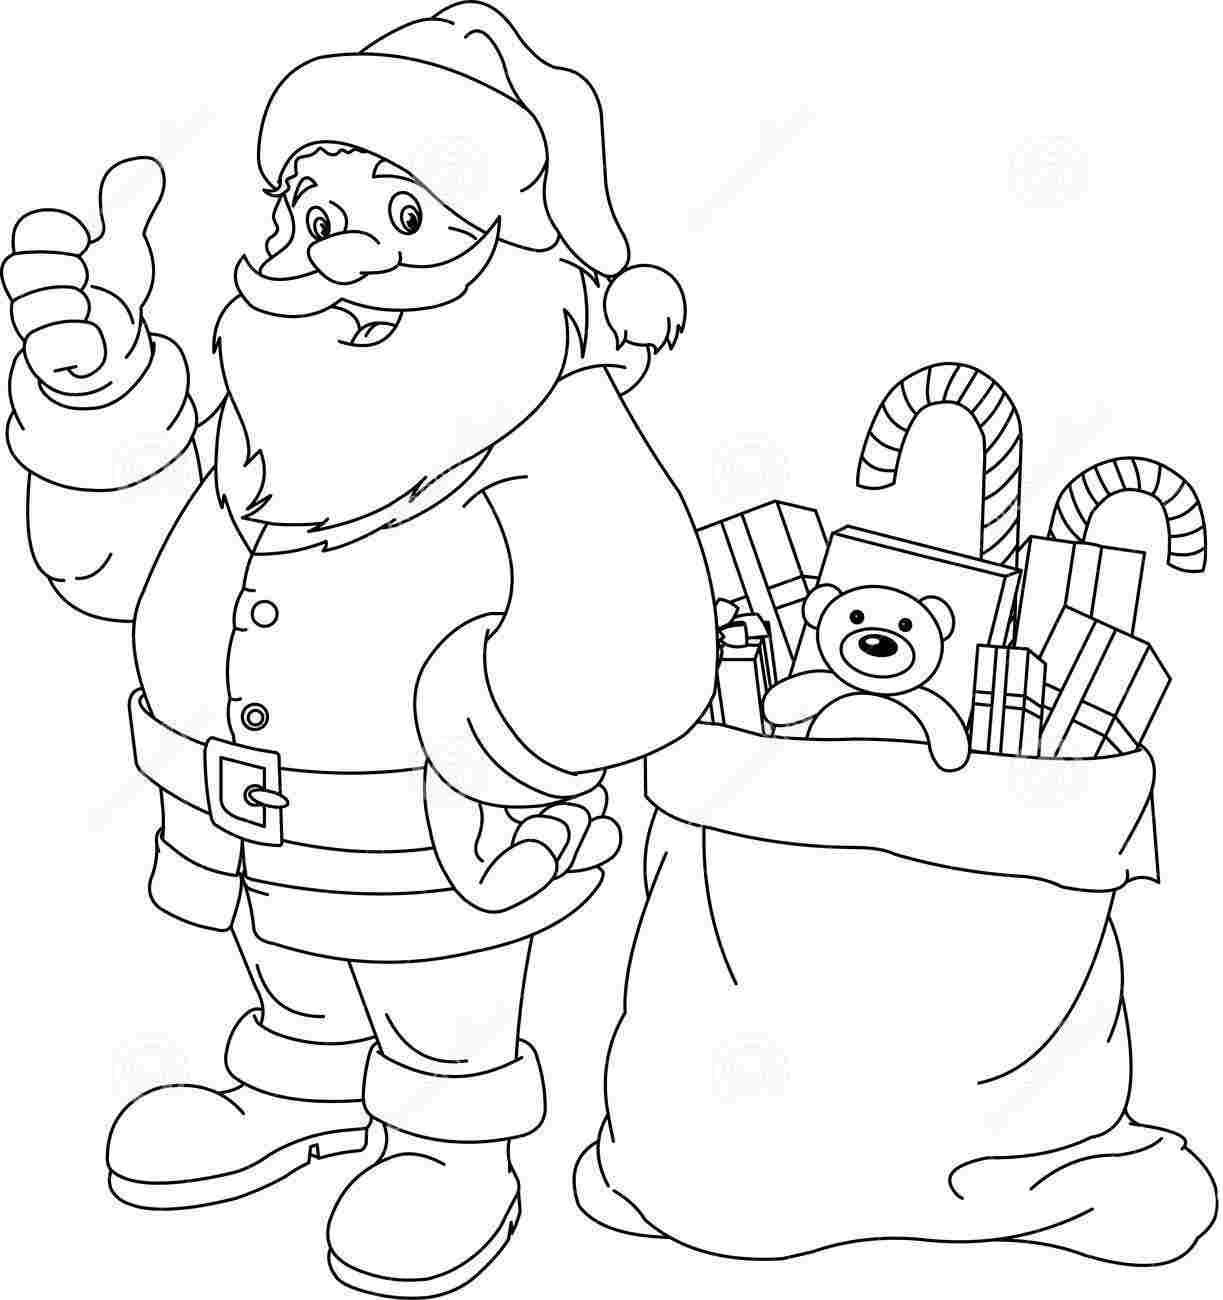 Santa Claus Coloring Pages 01 Santa Coloring Pages Coloring Pages For